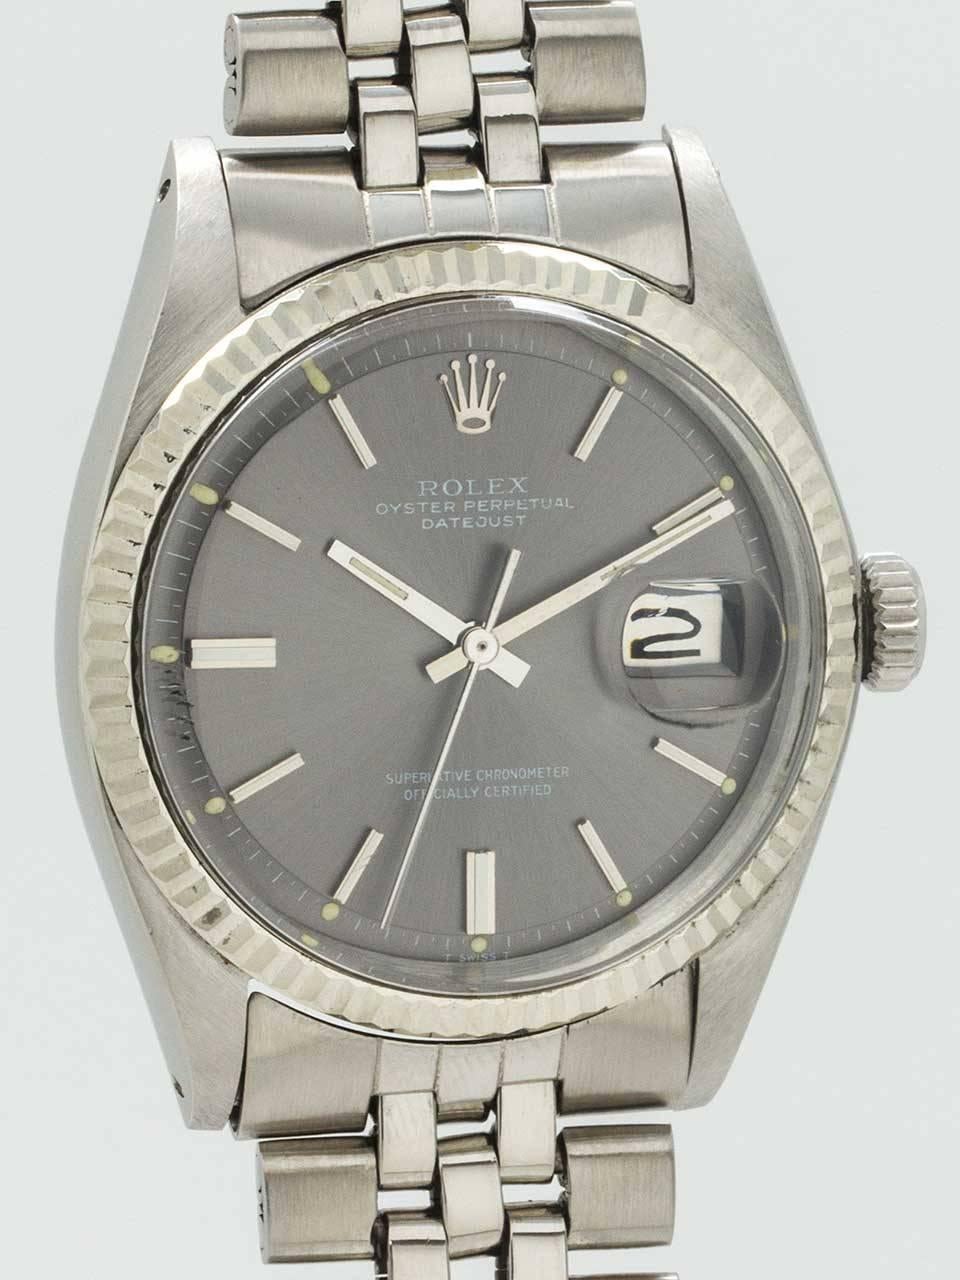 Rolex Stainless Steel Oyster Perpetual Datejust ref 1601 serial number 2.8 million circa 1971. 36mm diameter case with 14K white gold fluted bezel and acrylic crystal. Original gray pie pan dial with applied silver indexes and silver baton hands.